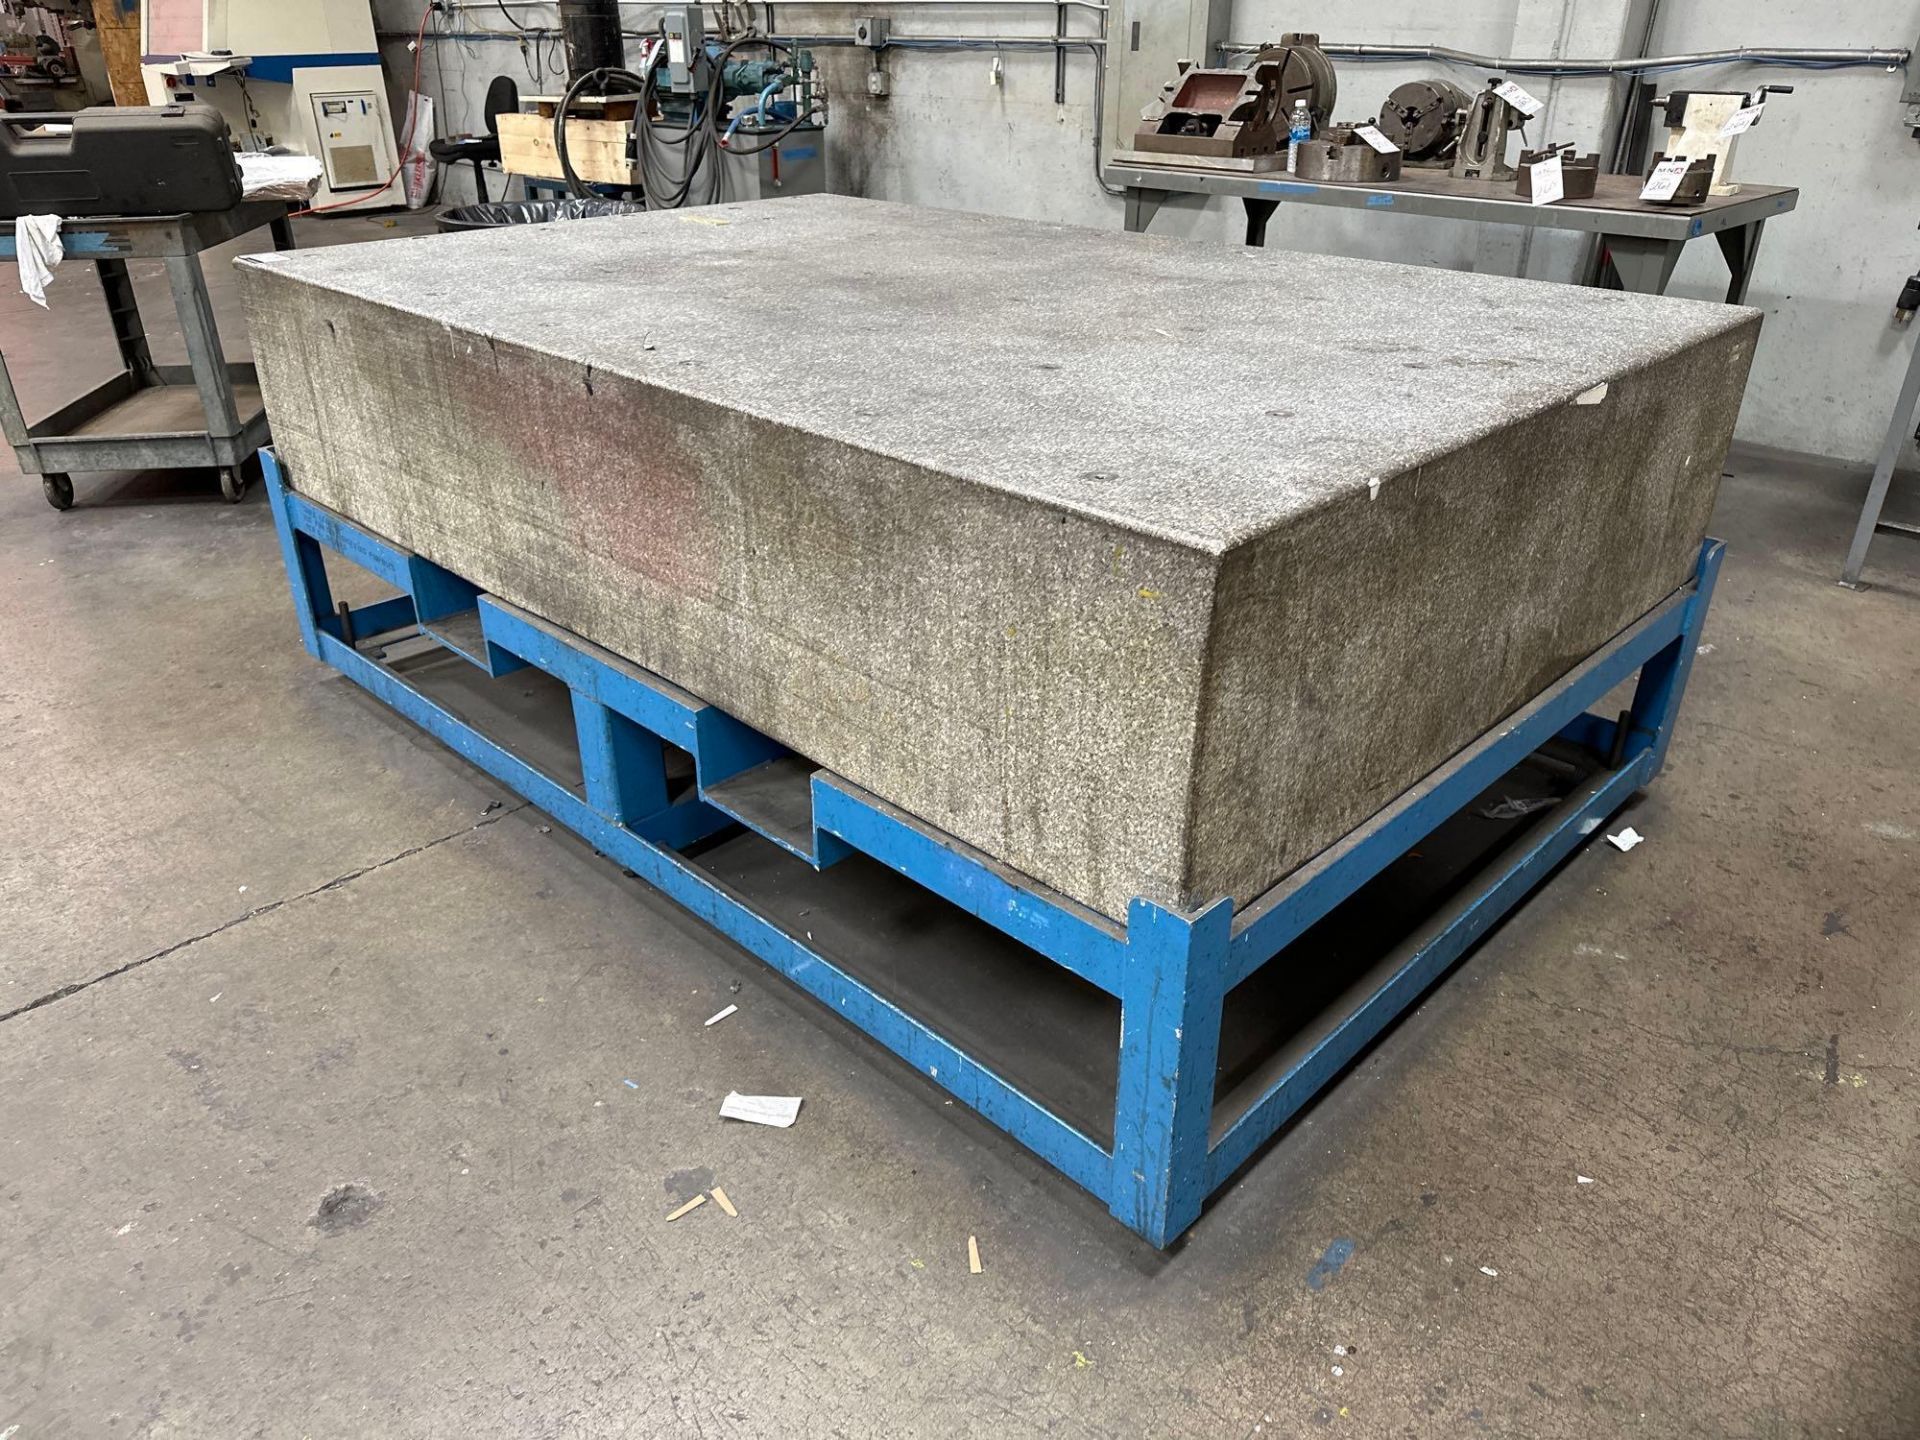 18” x 59” x 90” Granite Surface Plate w/ Steel Stand - Image 2 of 6